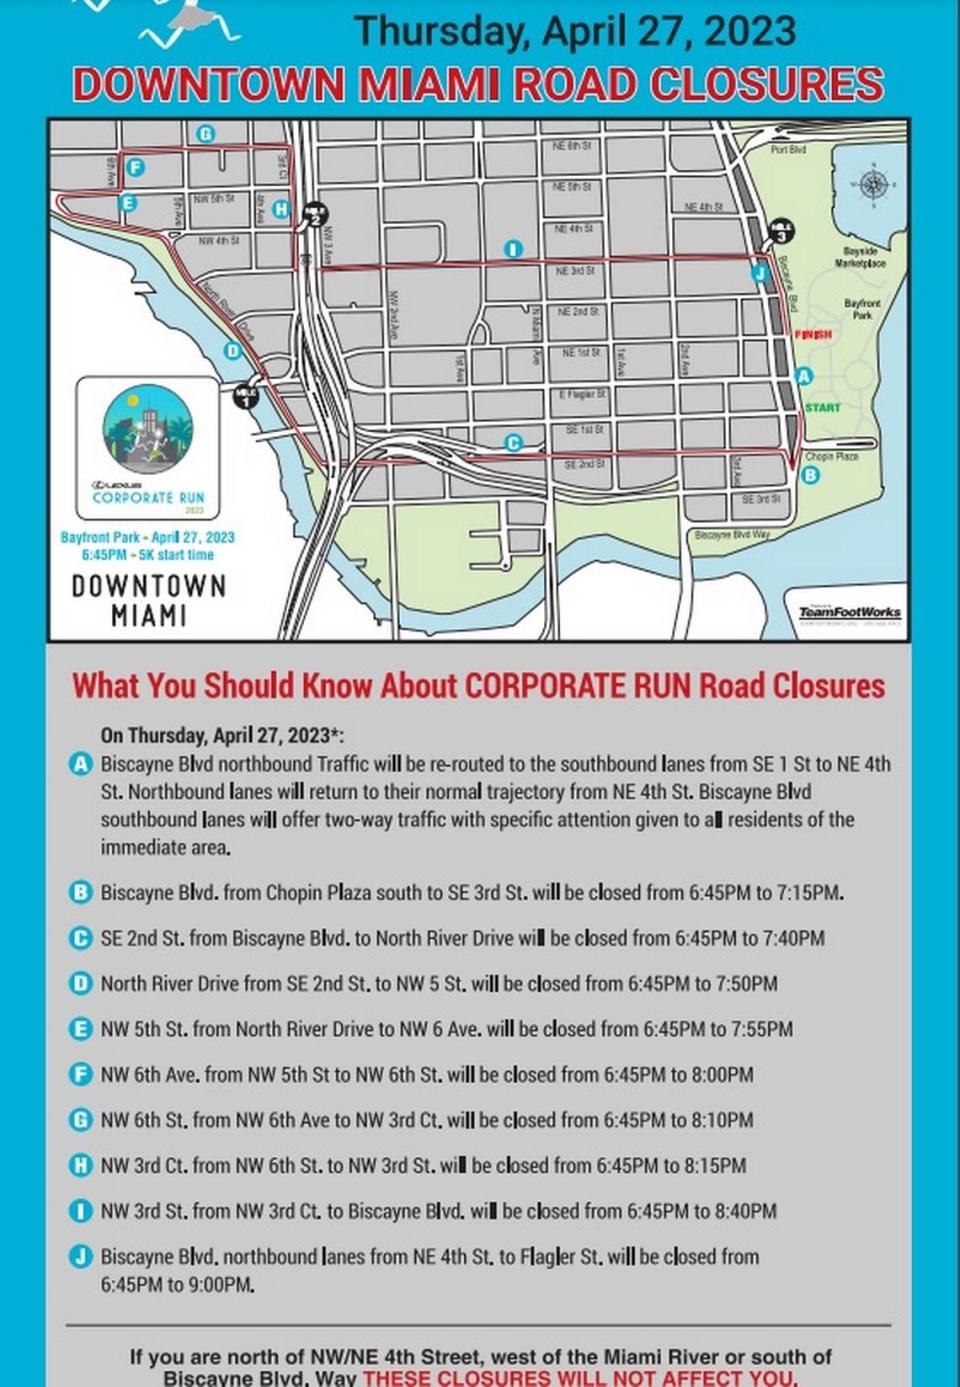 Team Footworks’ Miami road closures card for the 2023 Lexus Corporate Run on April 27, 2023.